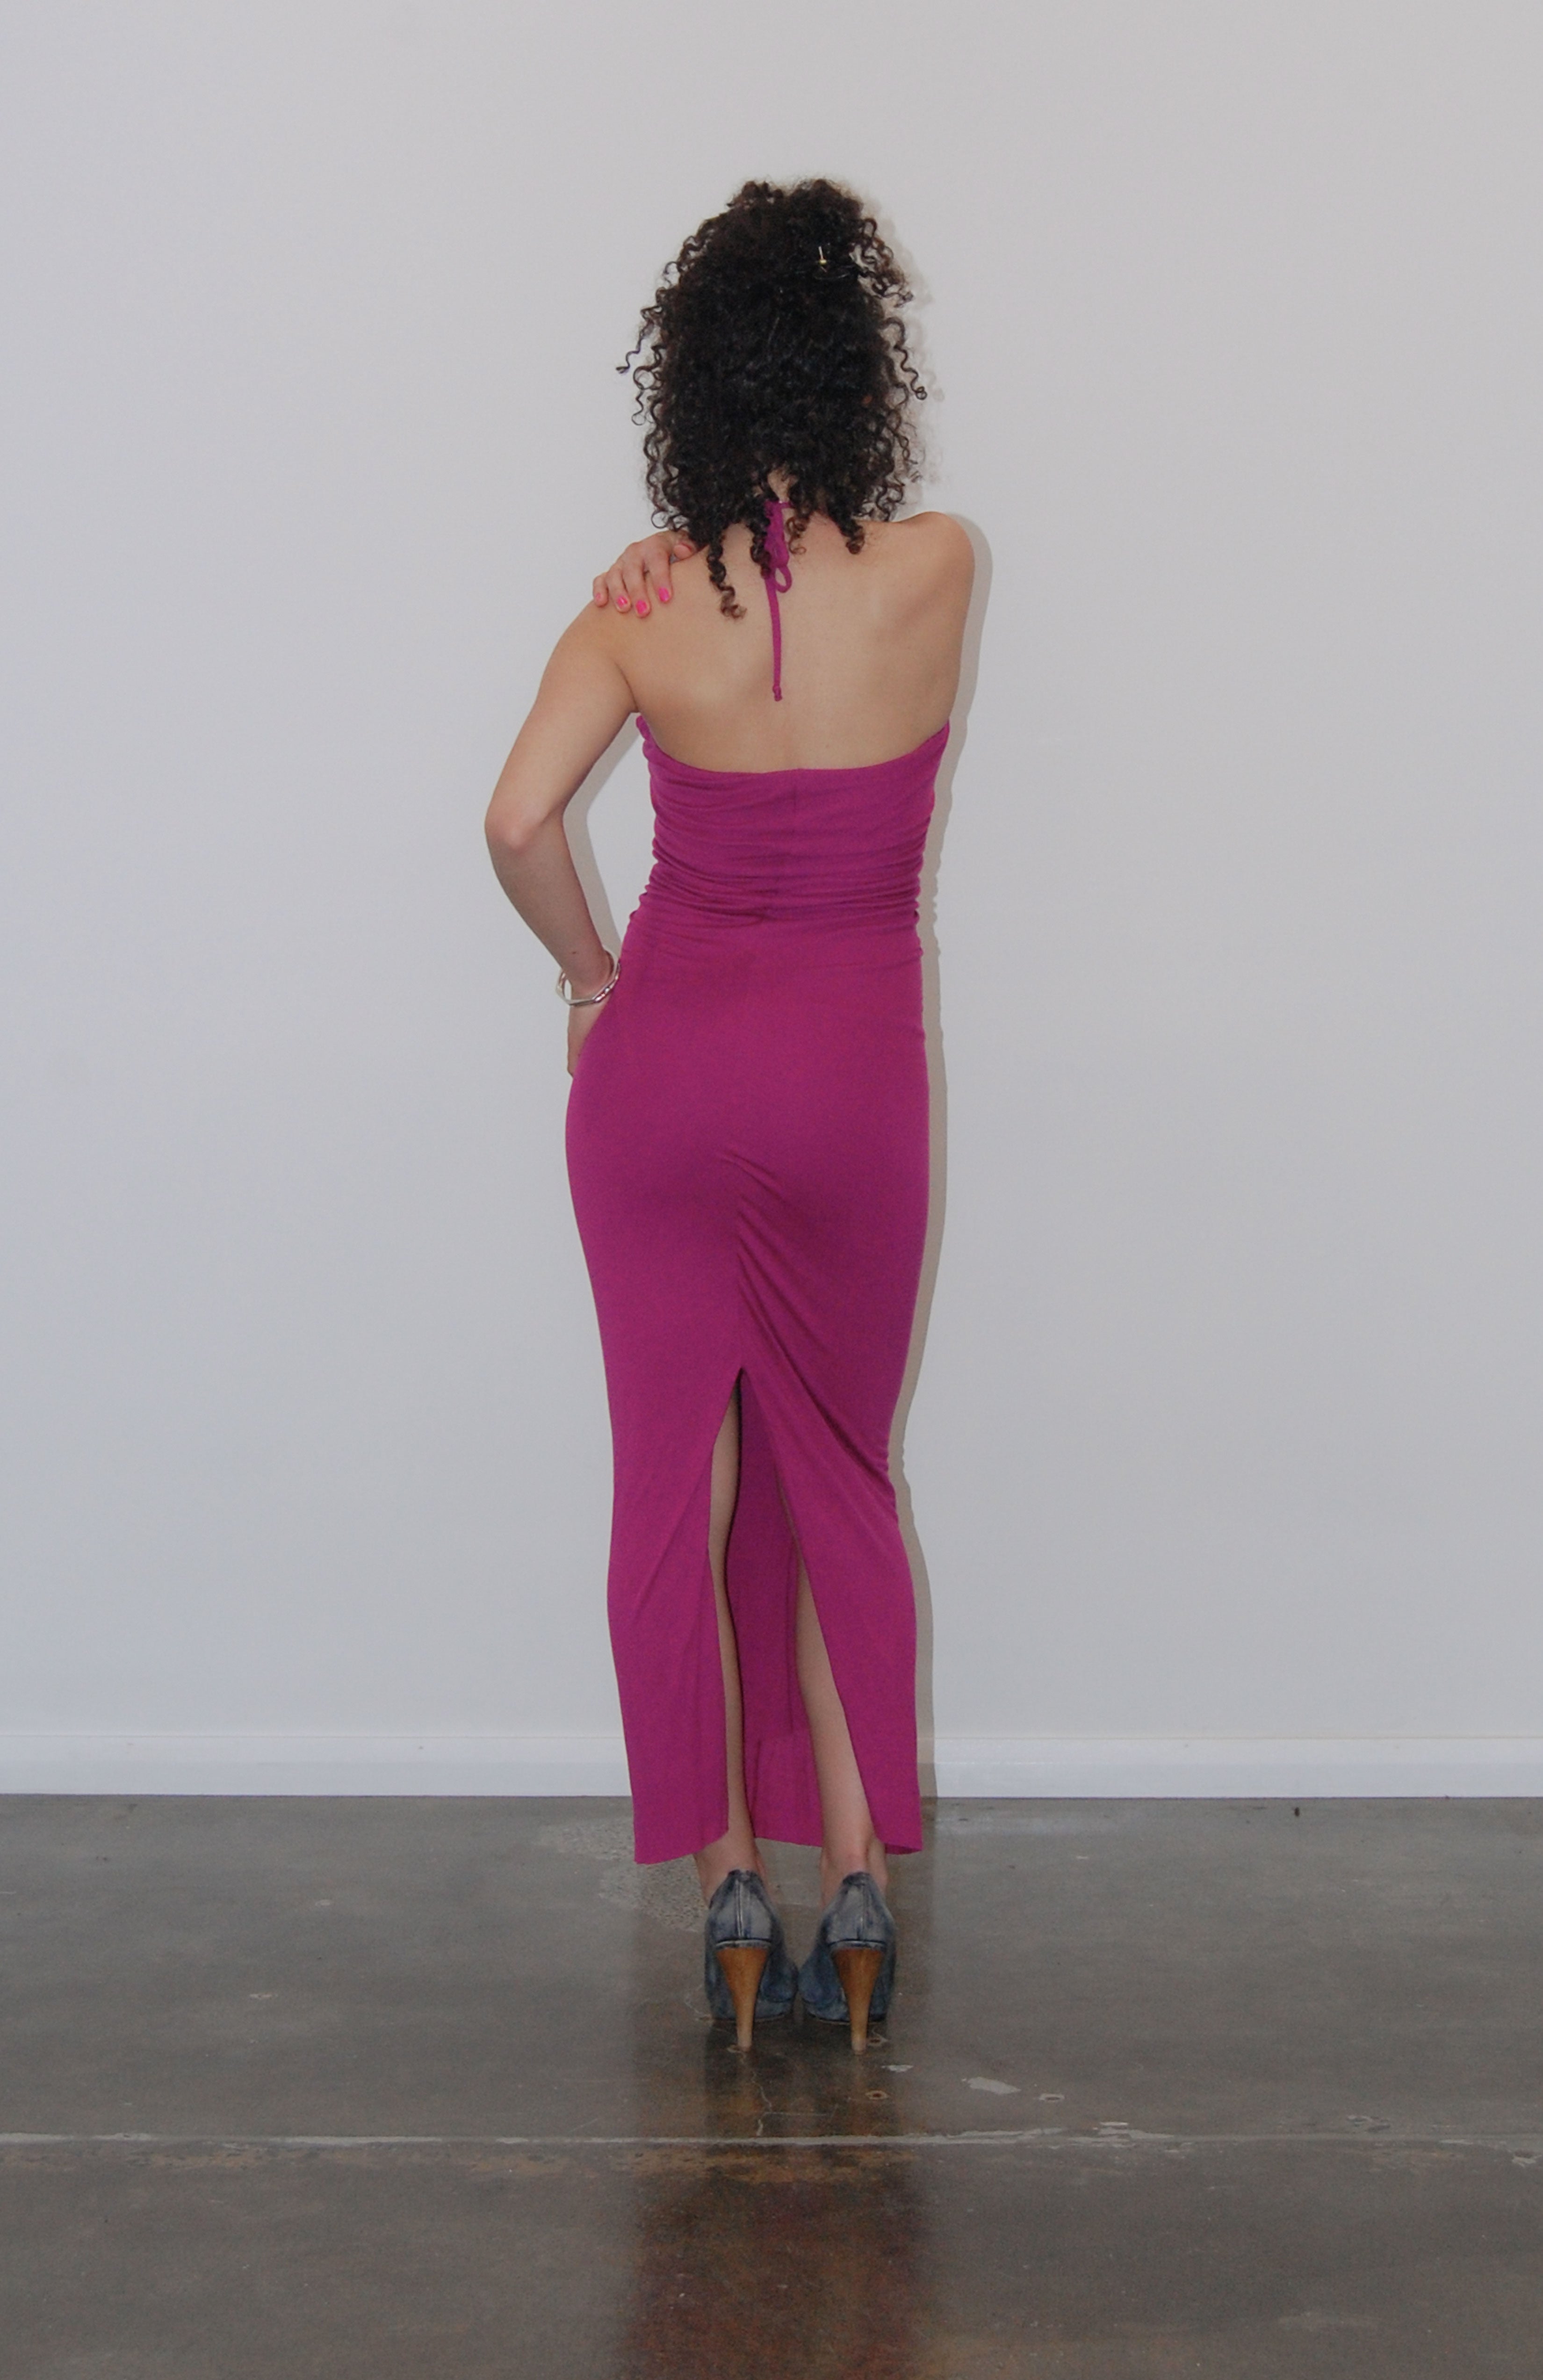 Maroske Peech Purse Maxi Dress, Hot pink, fuchsia, Halter, Gathered, shopping, Mall, Alt, Indie, Core, Cyber, attached bag, Attached purse, Indie, Independent, Maroske Peech, side split, back split, Single adjustable spaghetti strap, Viscose, Satin Satin, Magnetic closure